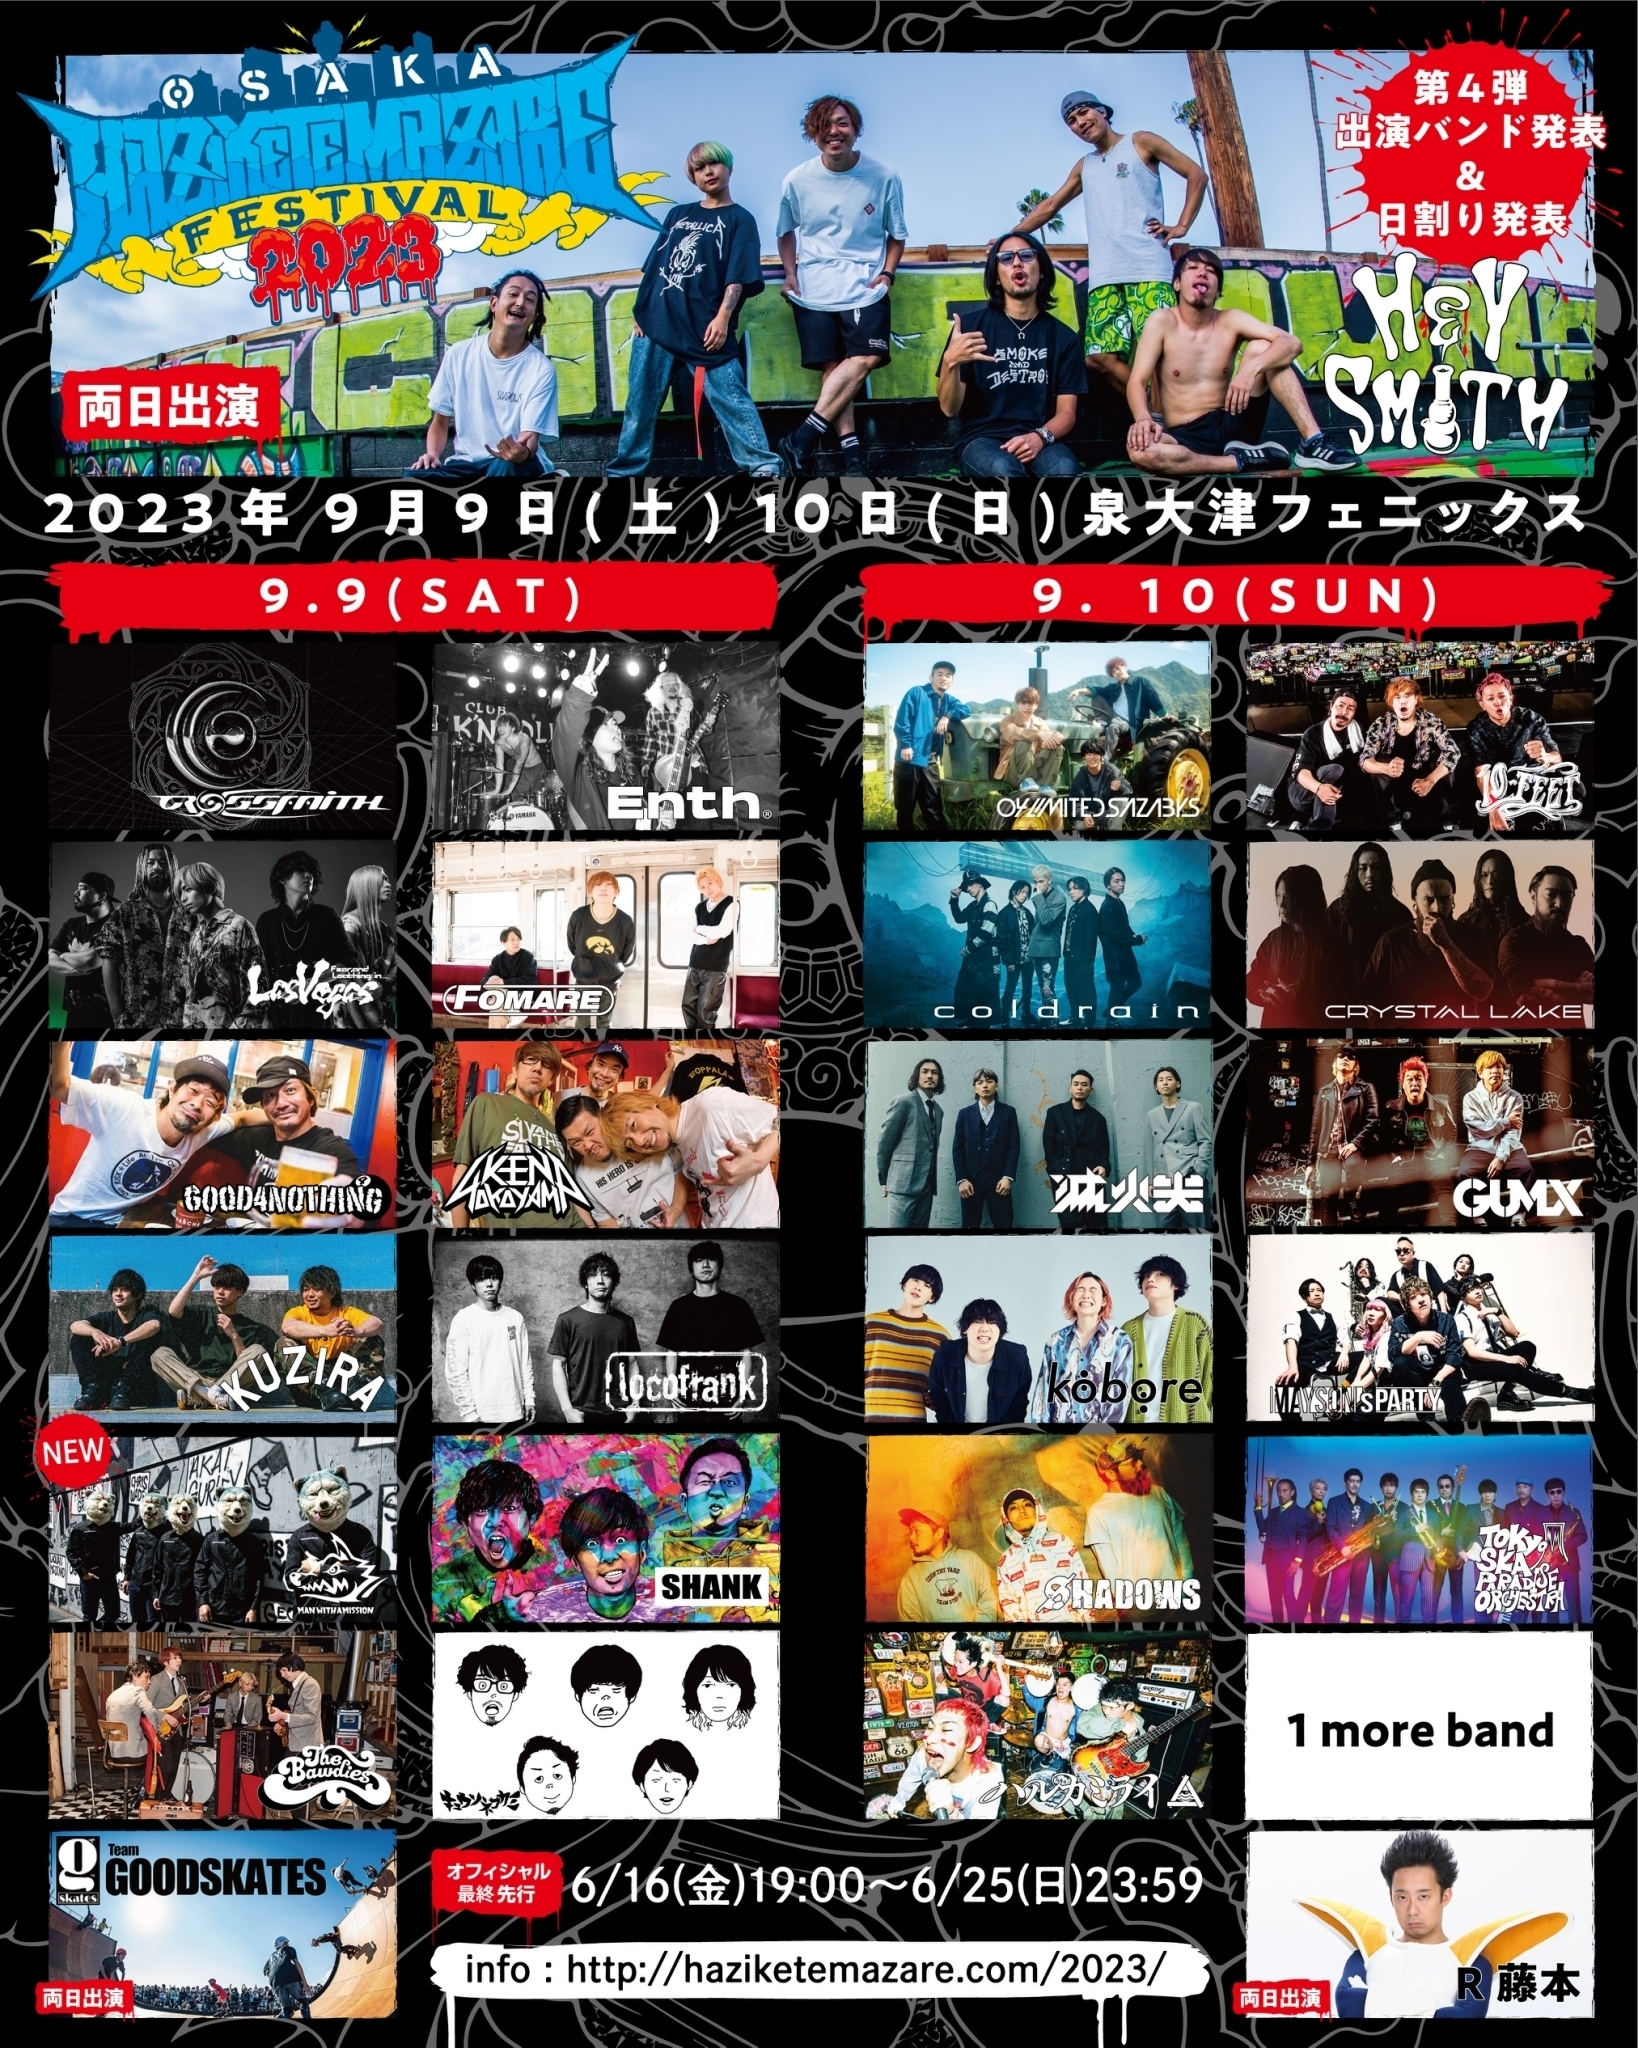 NEWS】ハジマザ 2023第４弾出演者 (MAN WITH A MISSION